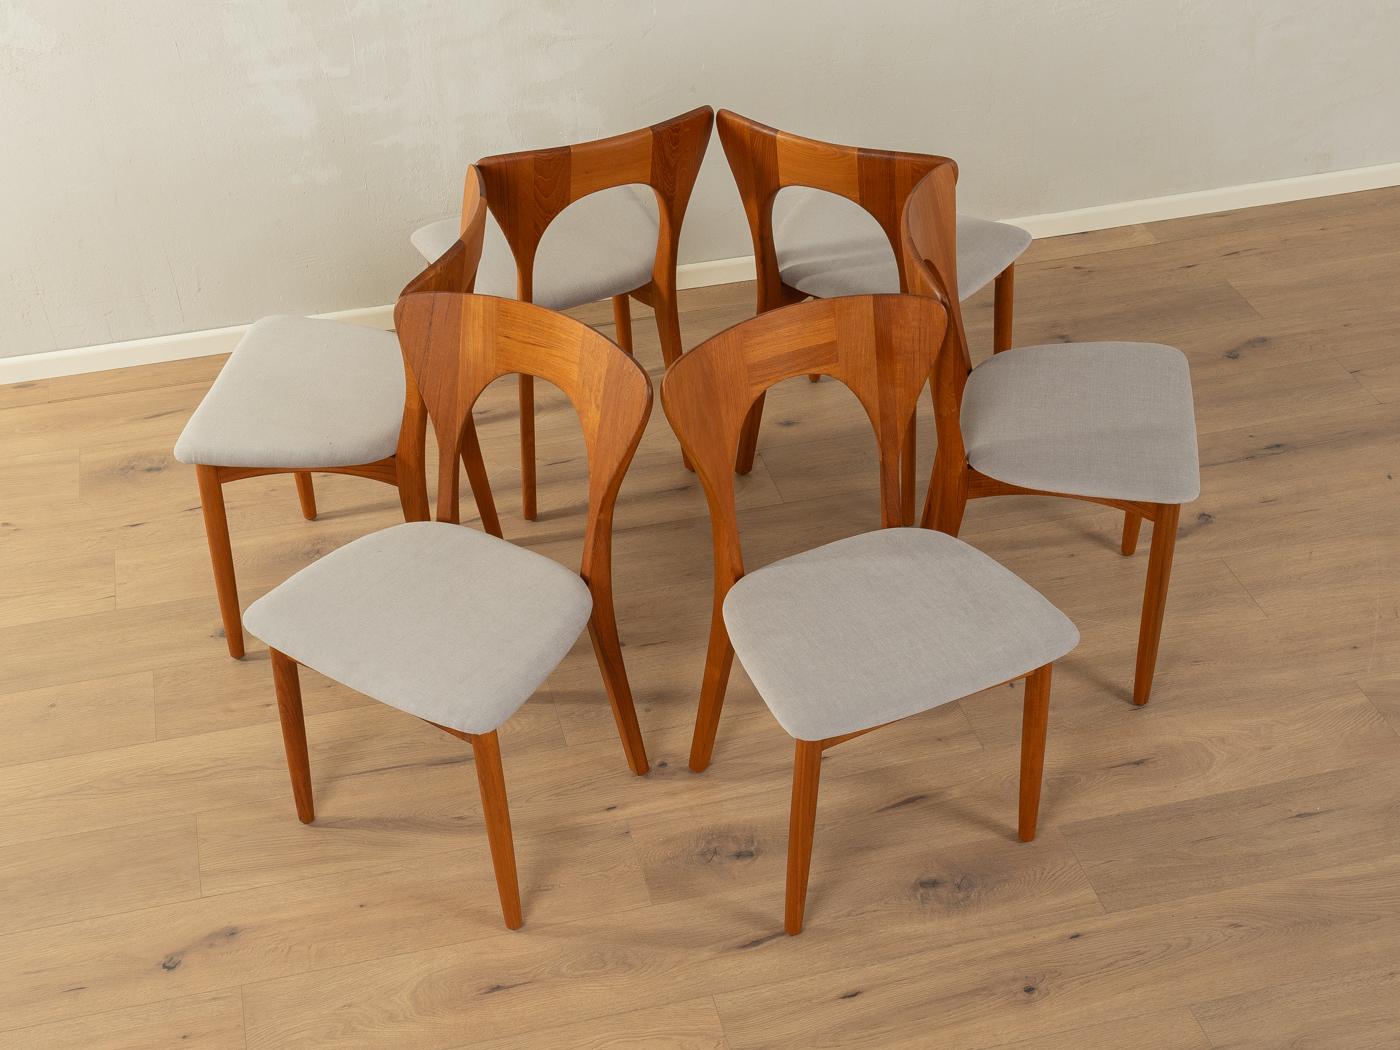 Classic dining chairs model “Peter” from the 1960s by Niels Koefoed for Koefoeds Hornslet. Solid teak frame. The chairs have been reupholstered and covered with high-quality upholstery fabric in lightgrey. The offer includes six chairs.

Quality